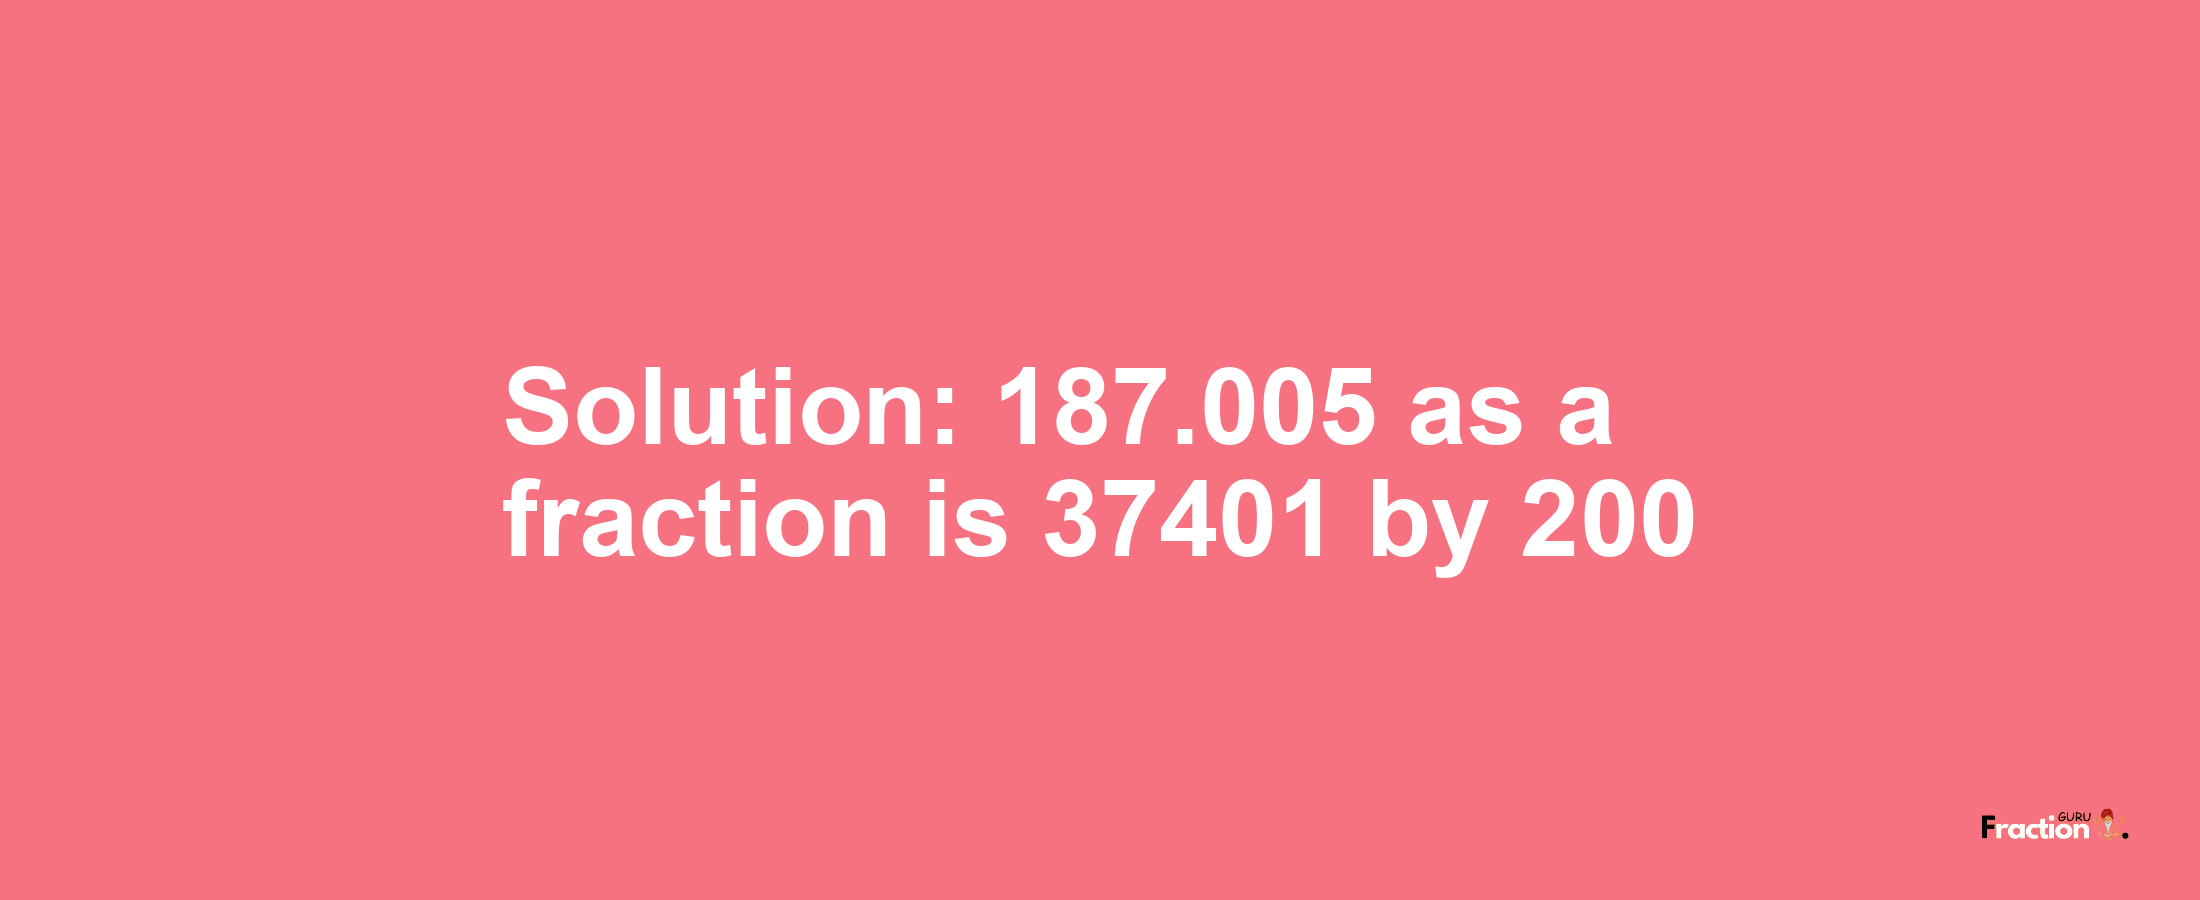 Solution:187.005 as a fraction is 37401/200